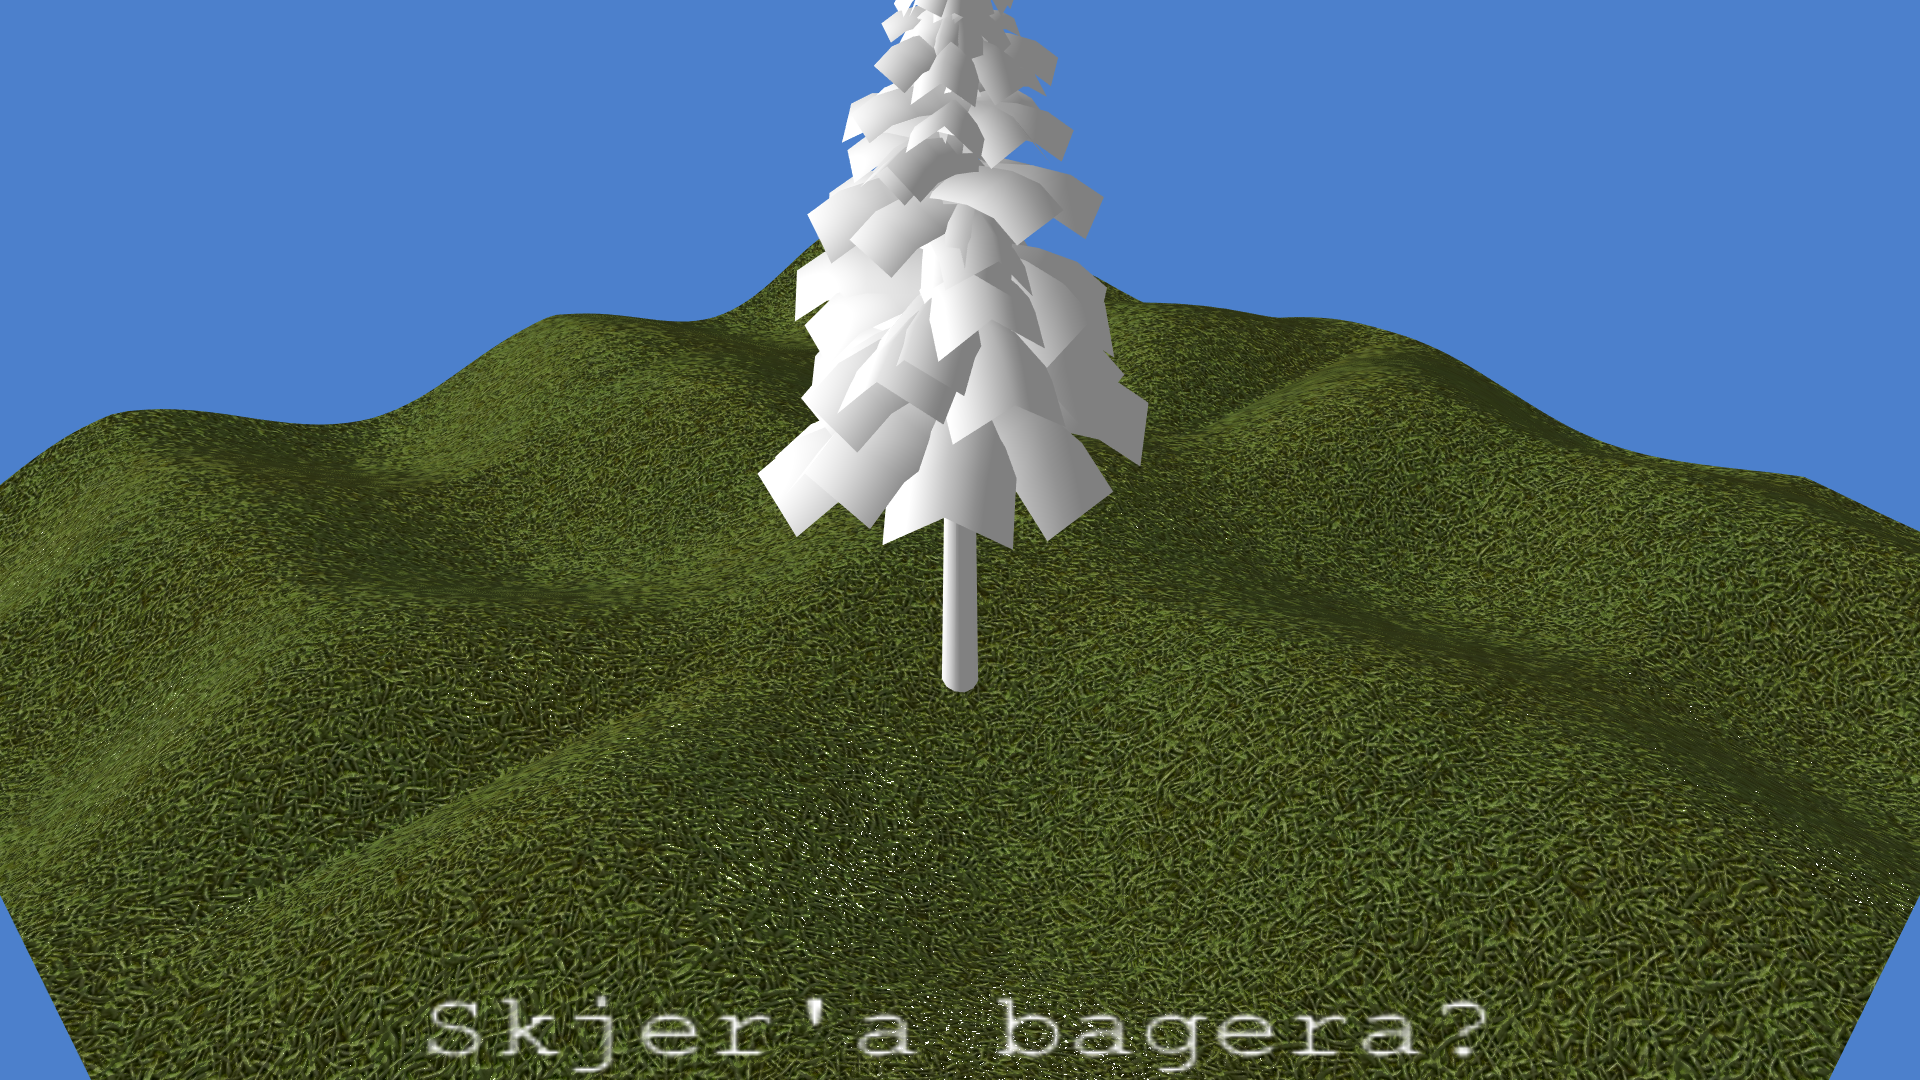 Tree model loaded from model file, no texture support yet.